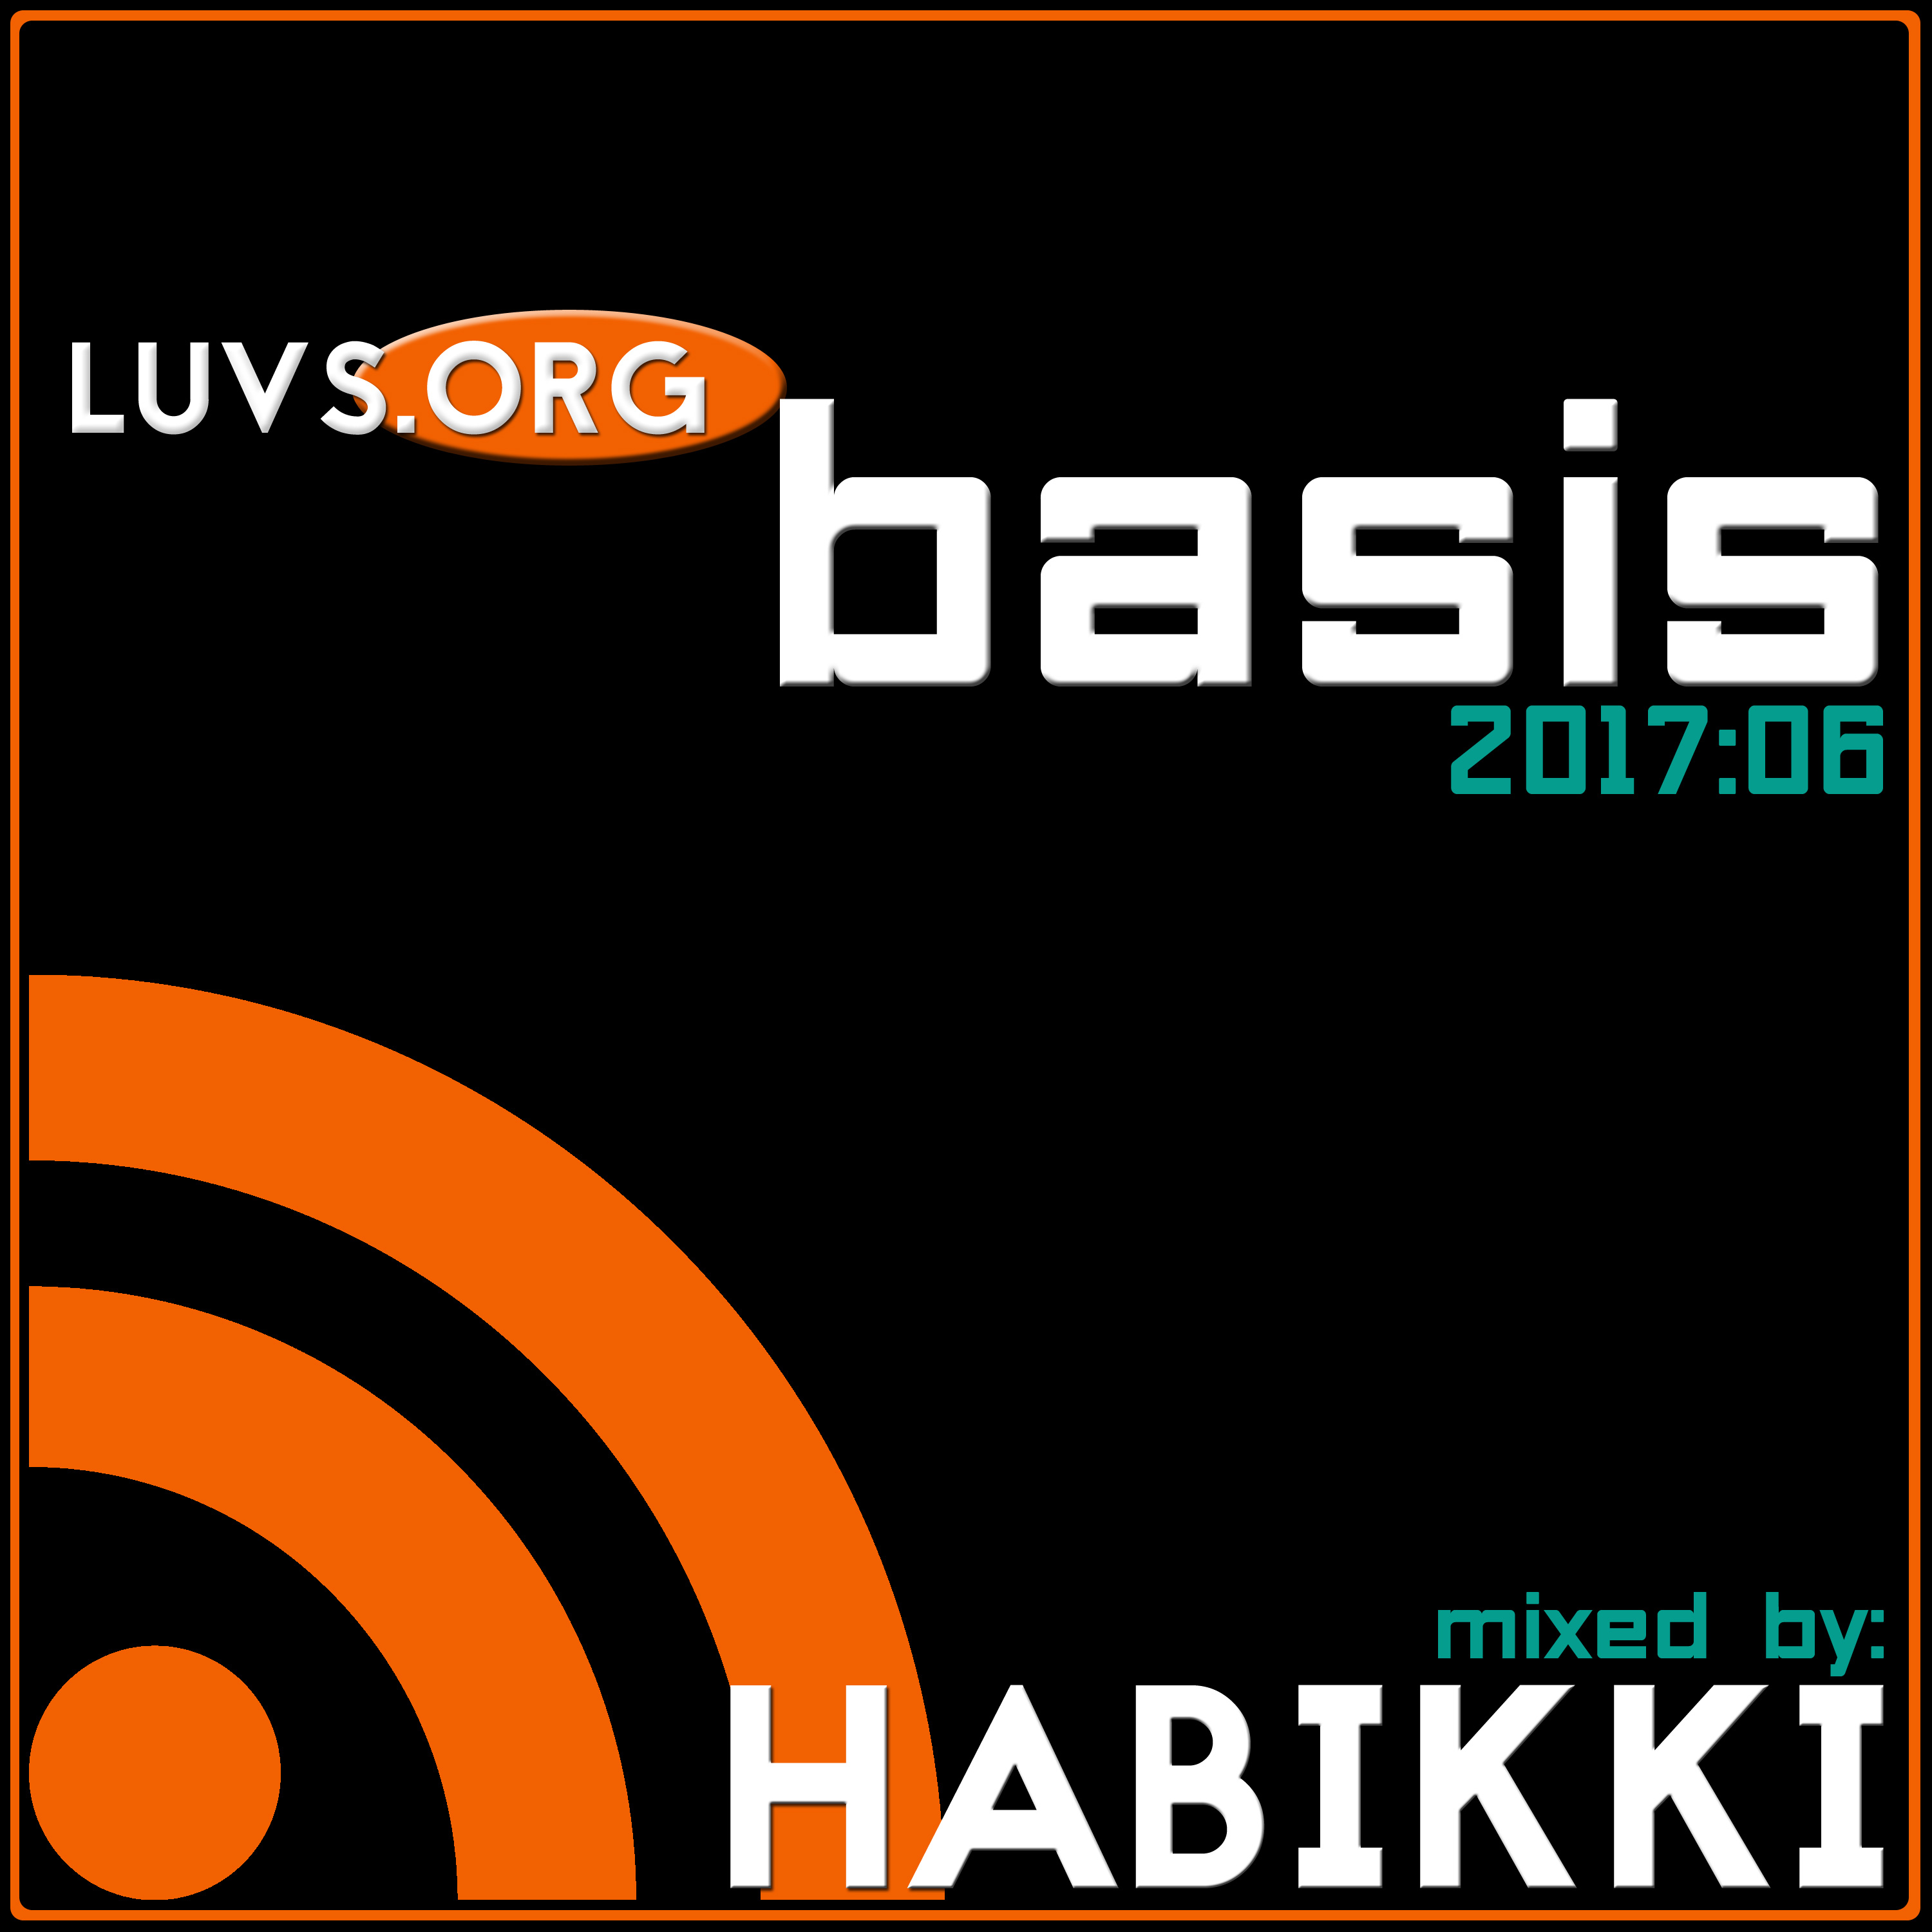 Luvs.org Sessions: [2017:06] Basis